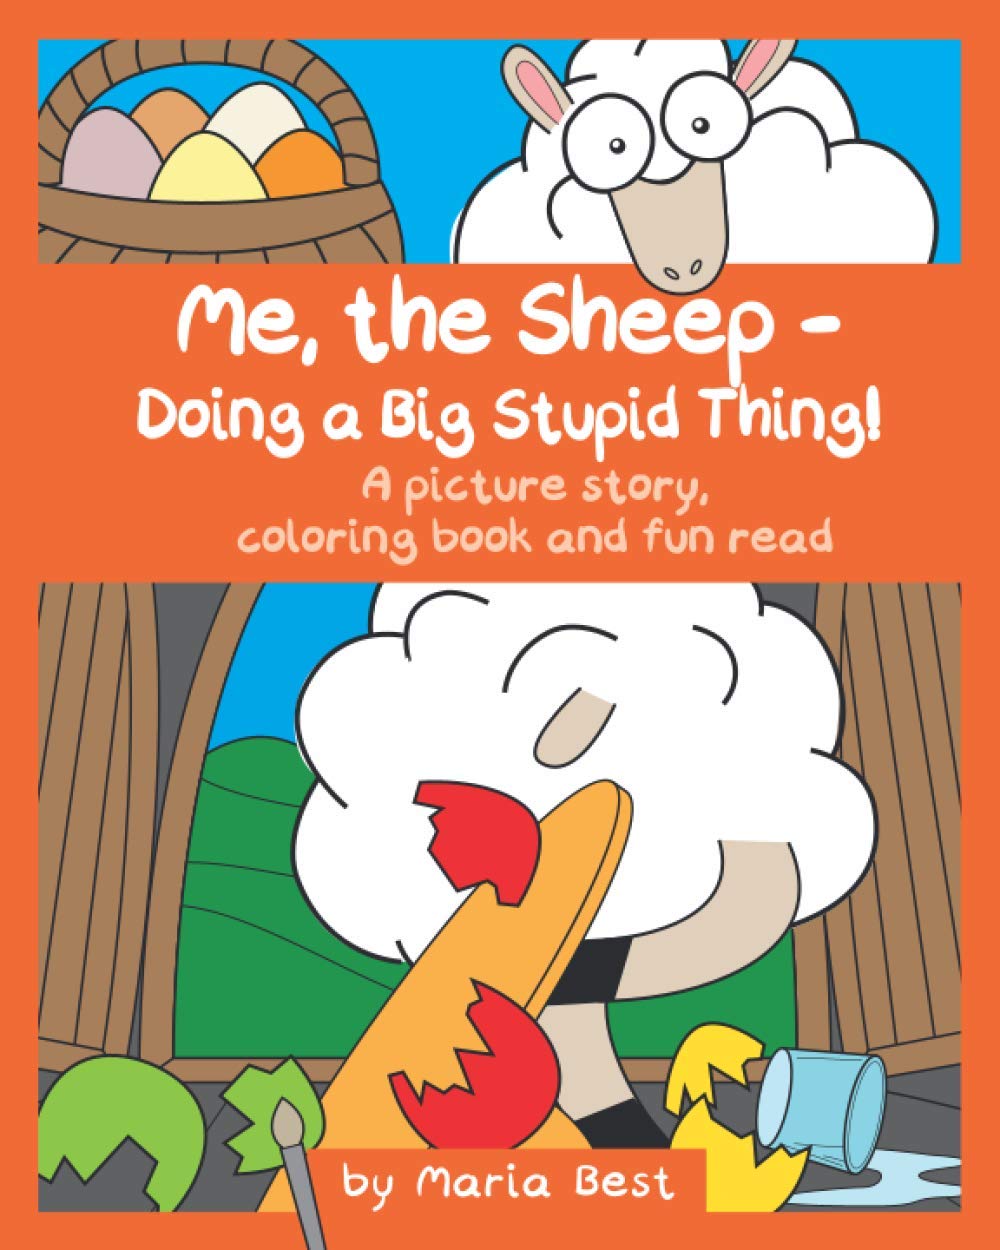 Art Creativity Book Cover "Me, the Sheep - Doing a Big Stupid Thing!"